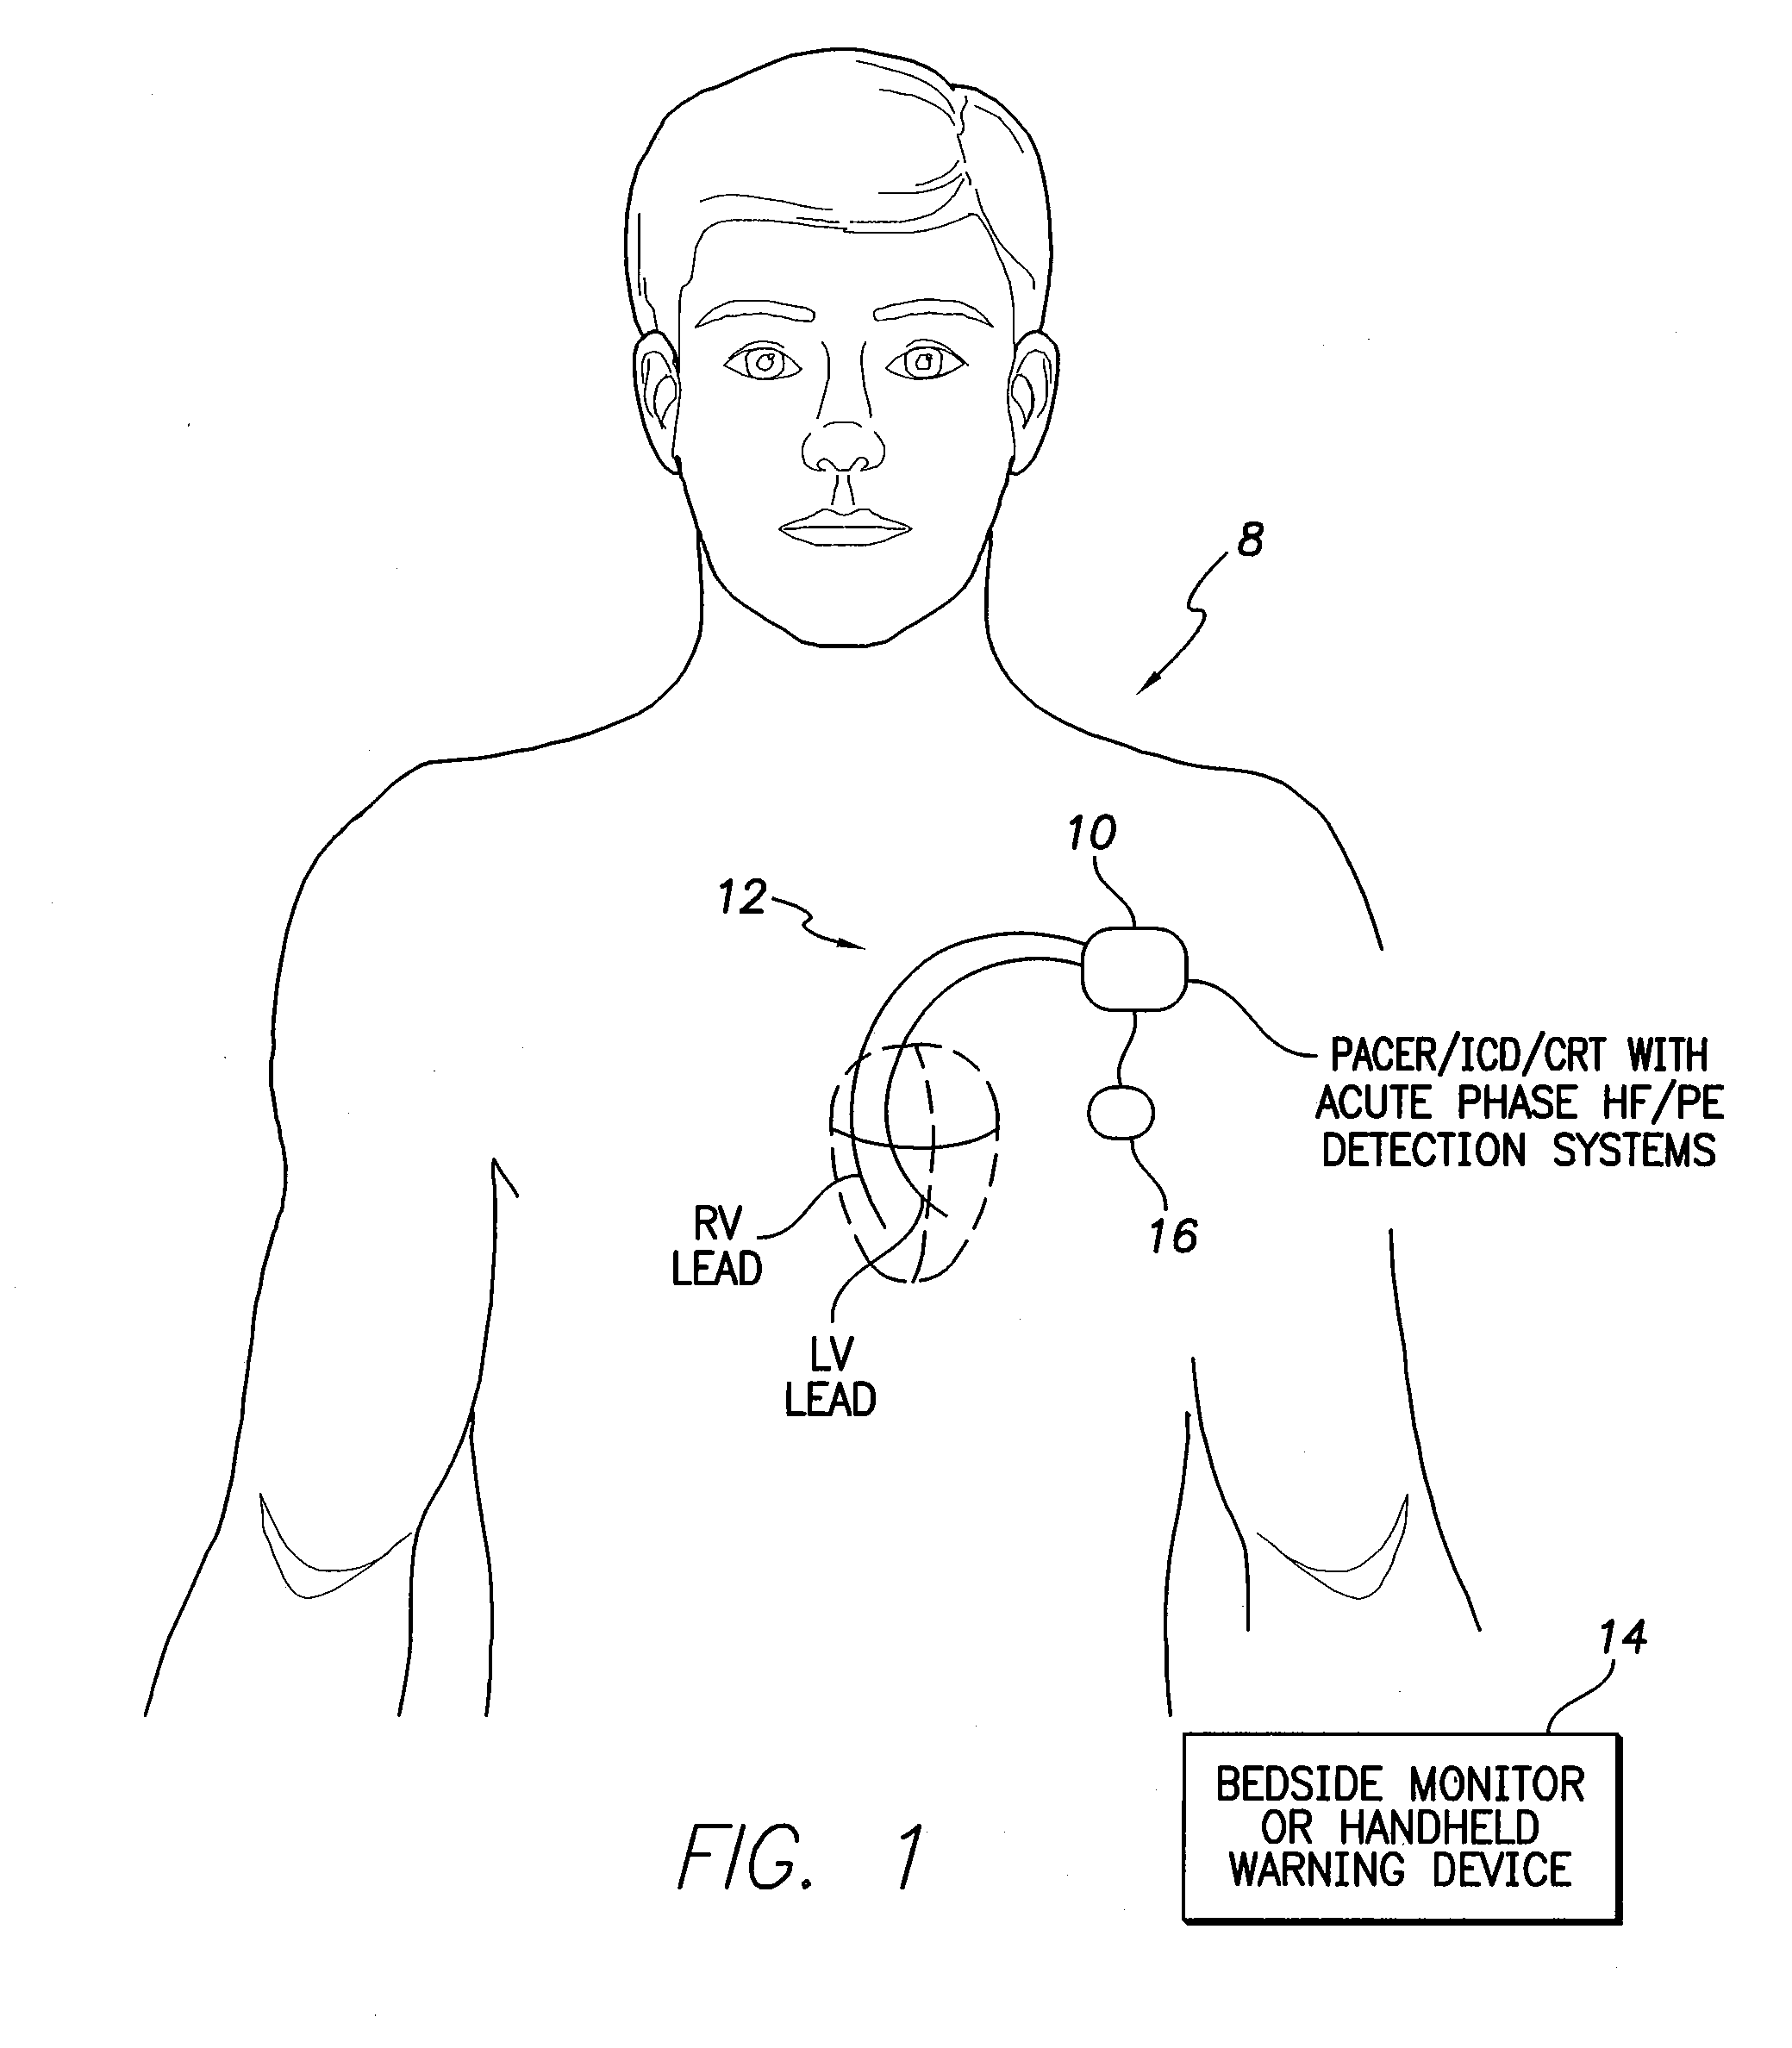 Systems and Methods for Activating and Controlling Impedance-Based Detection Systems of Implantable Medical Devices